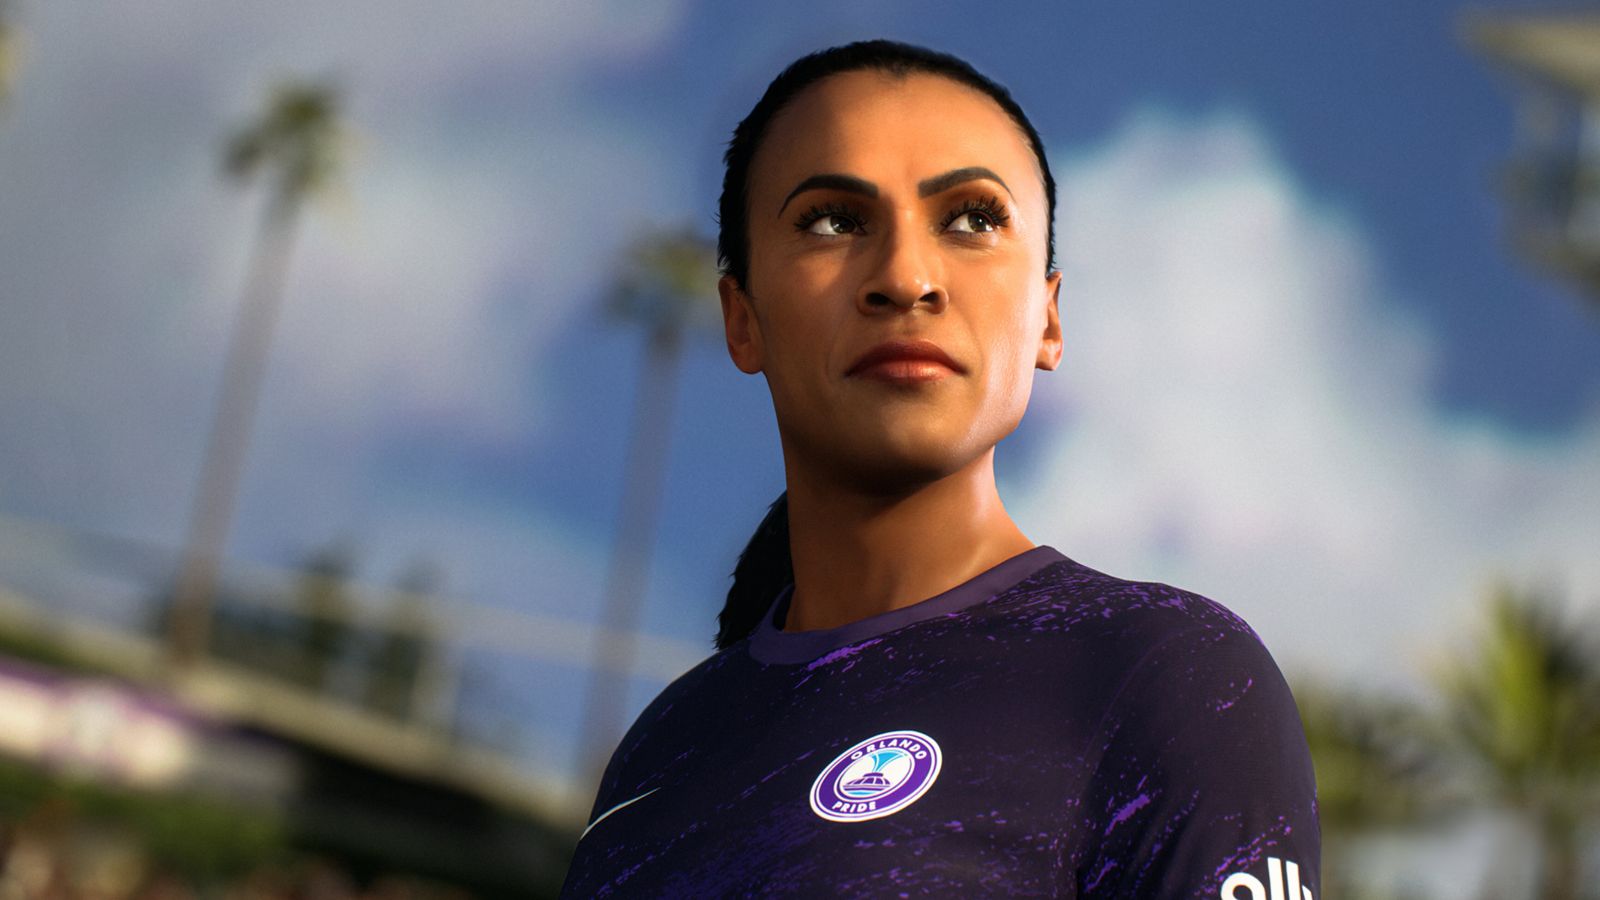 FIFA 23 Web App guide: How to use Companion App & features - Charlie INTEL